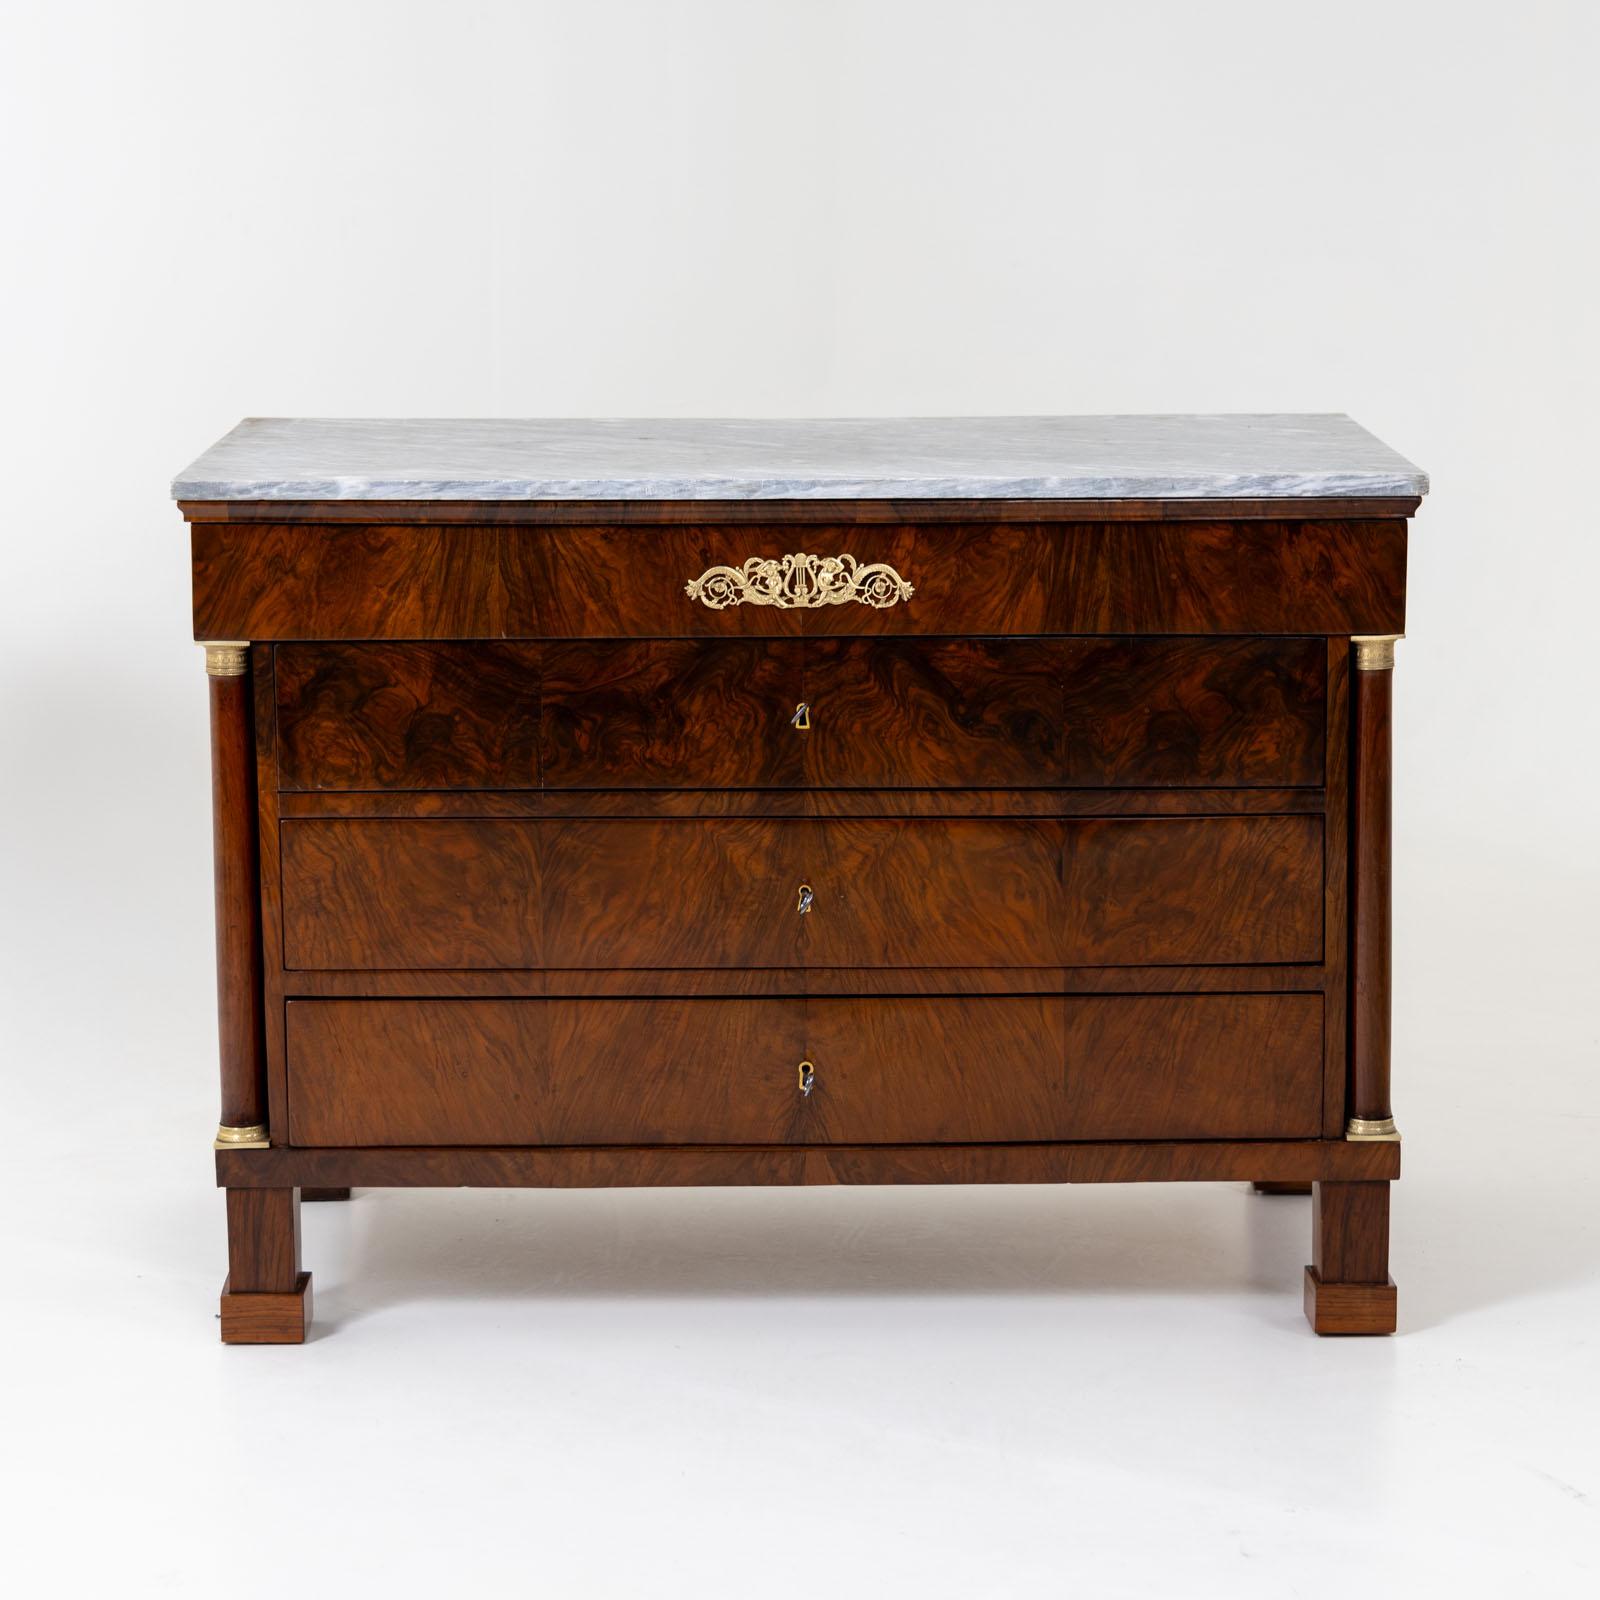 Pair of large chests of drawers with four drawers and flanking full columns with fire-gilt bronze capitals and bases. The chests of drawers are veneered in walnut and have a beautiful, dynamic veneer pattern. A light gray marble top rounds off the